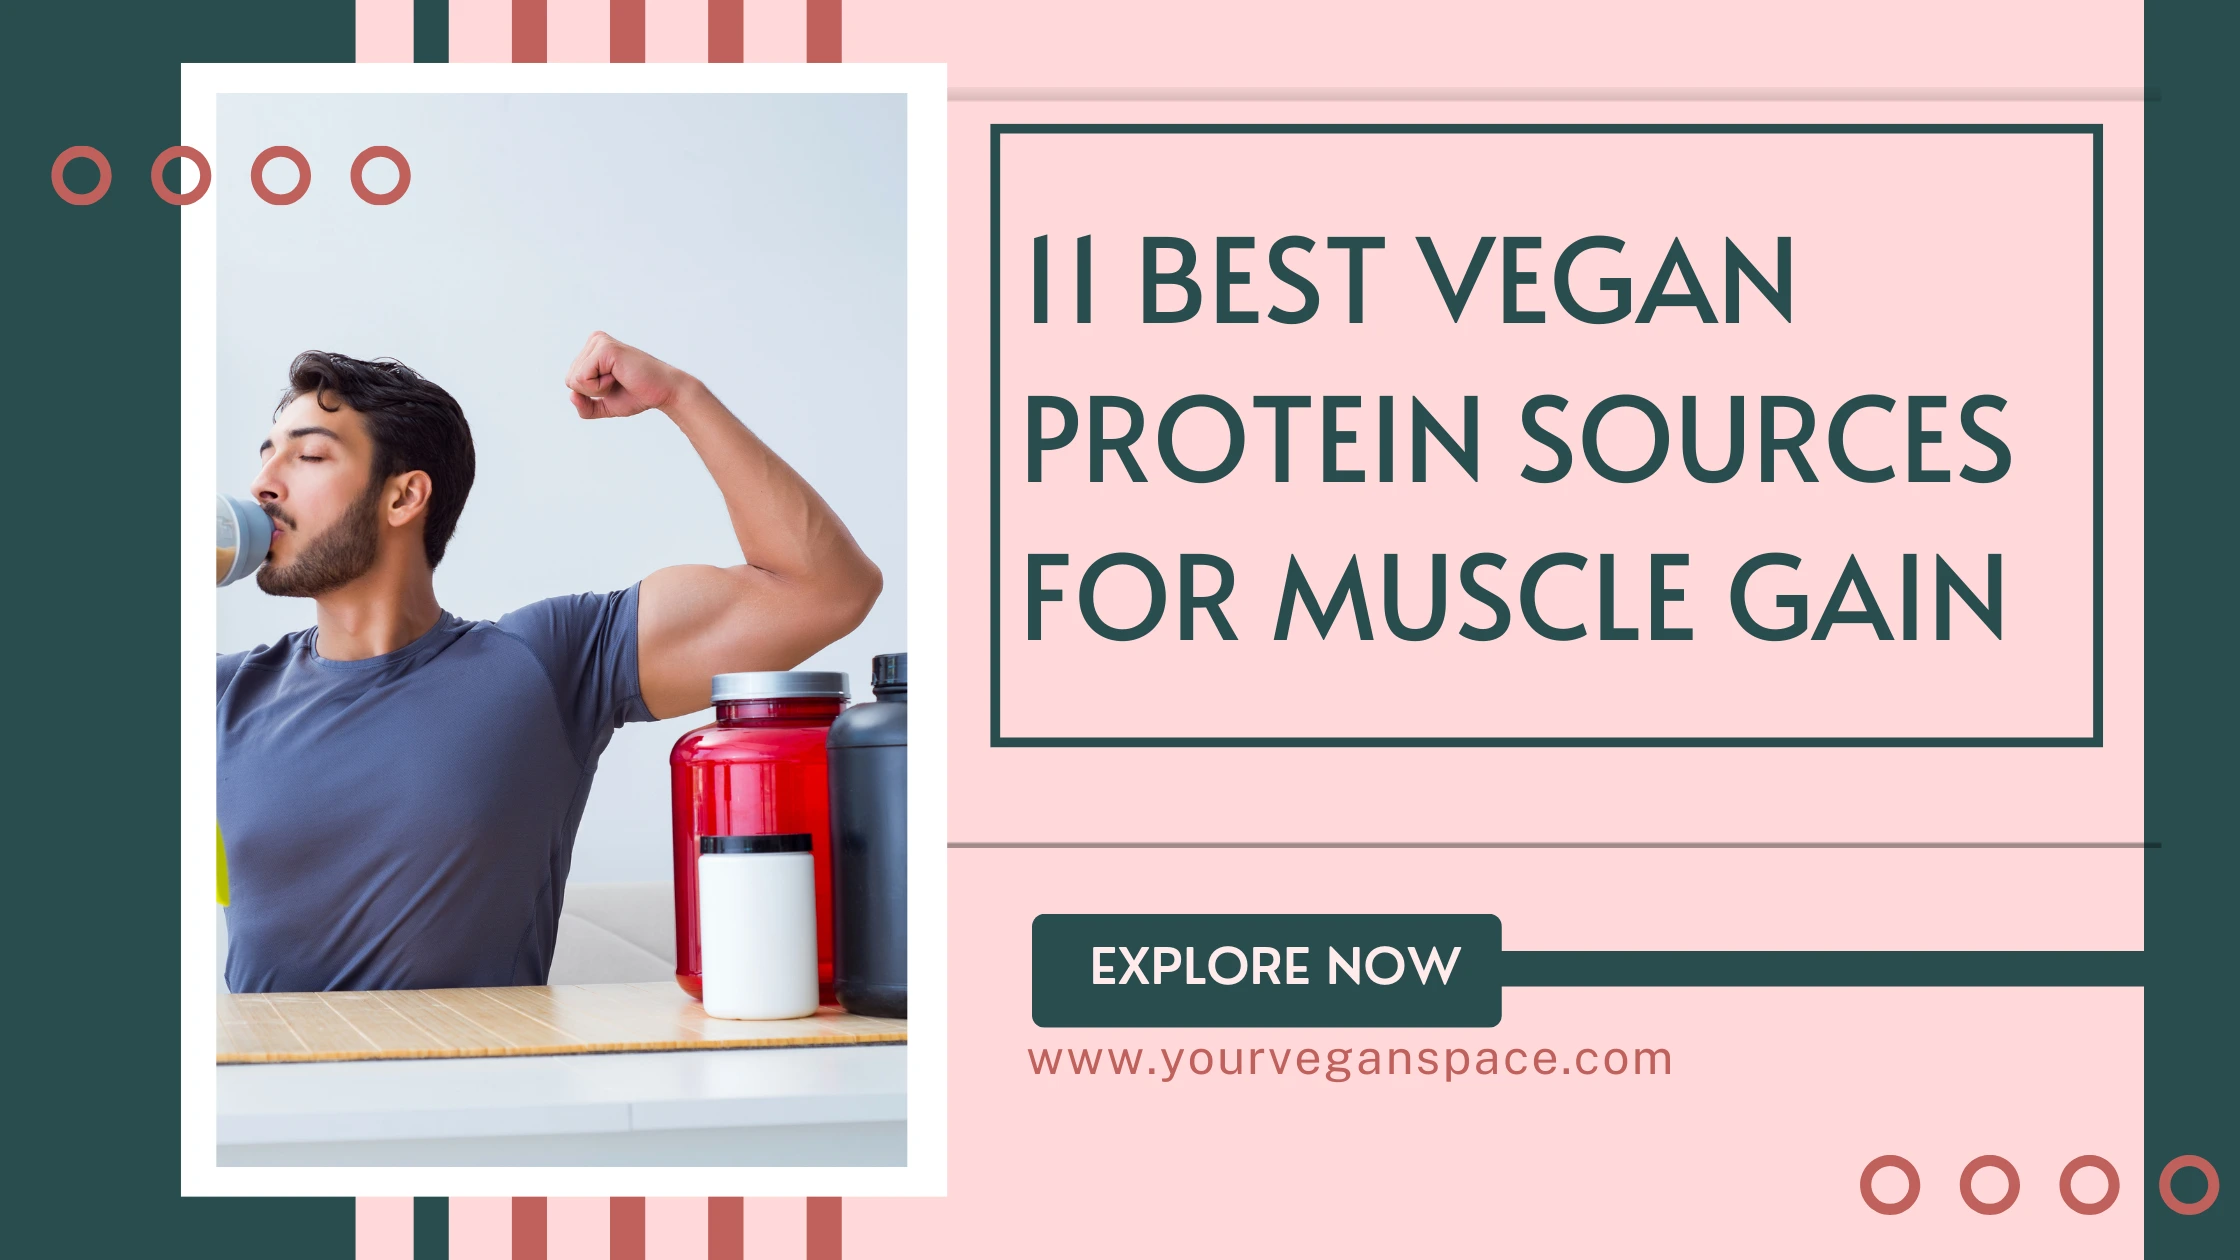 11 Best Vegan Protein Sources for Muscle Gain